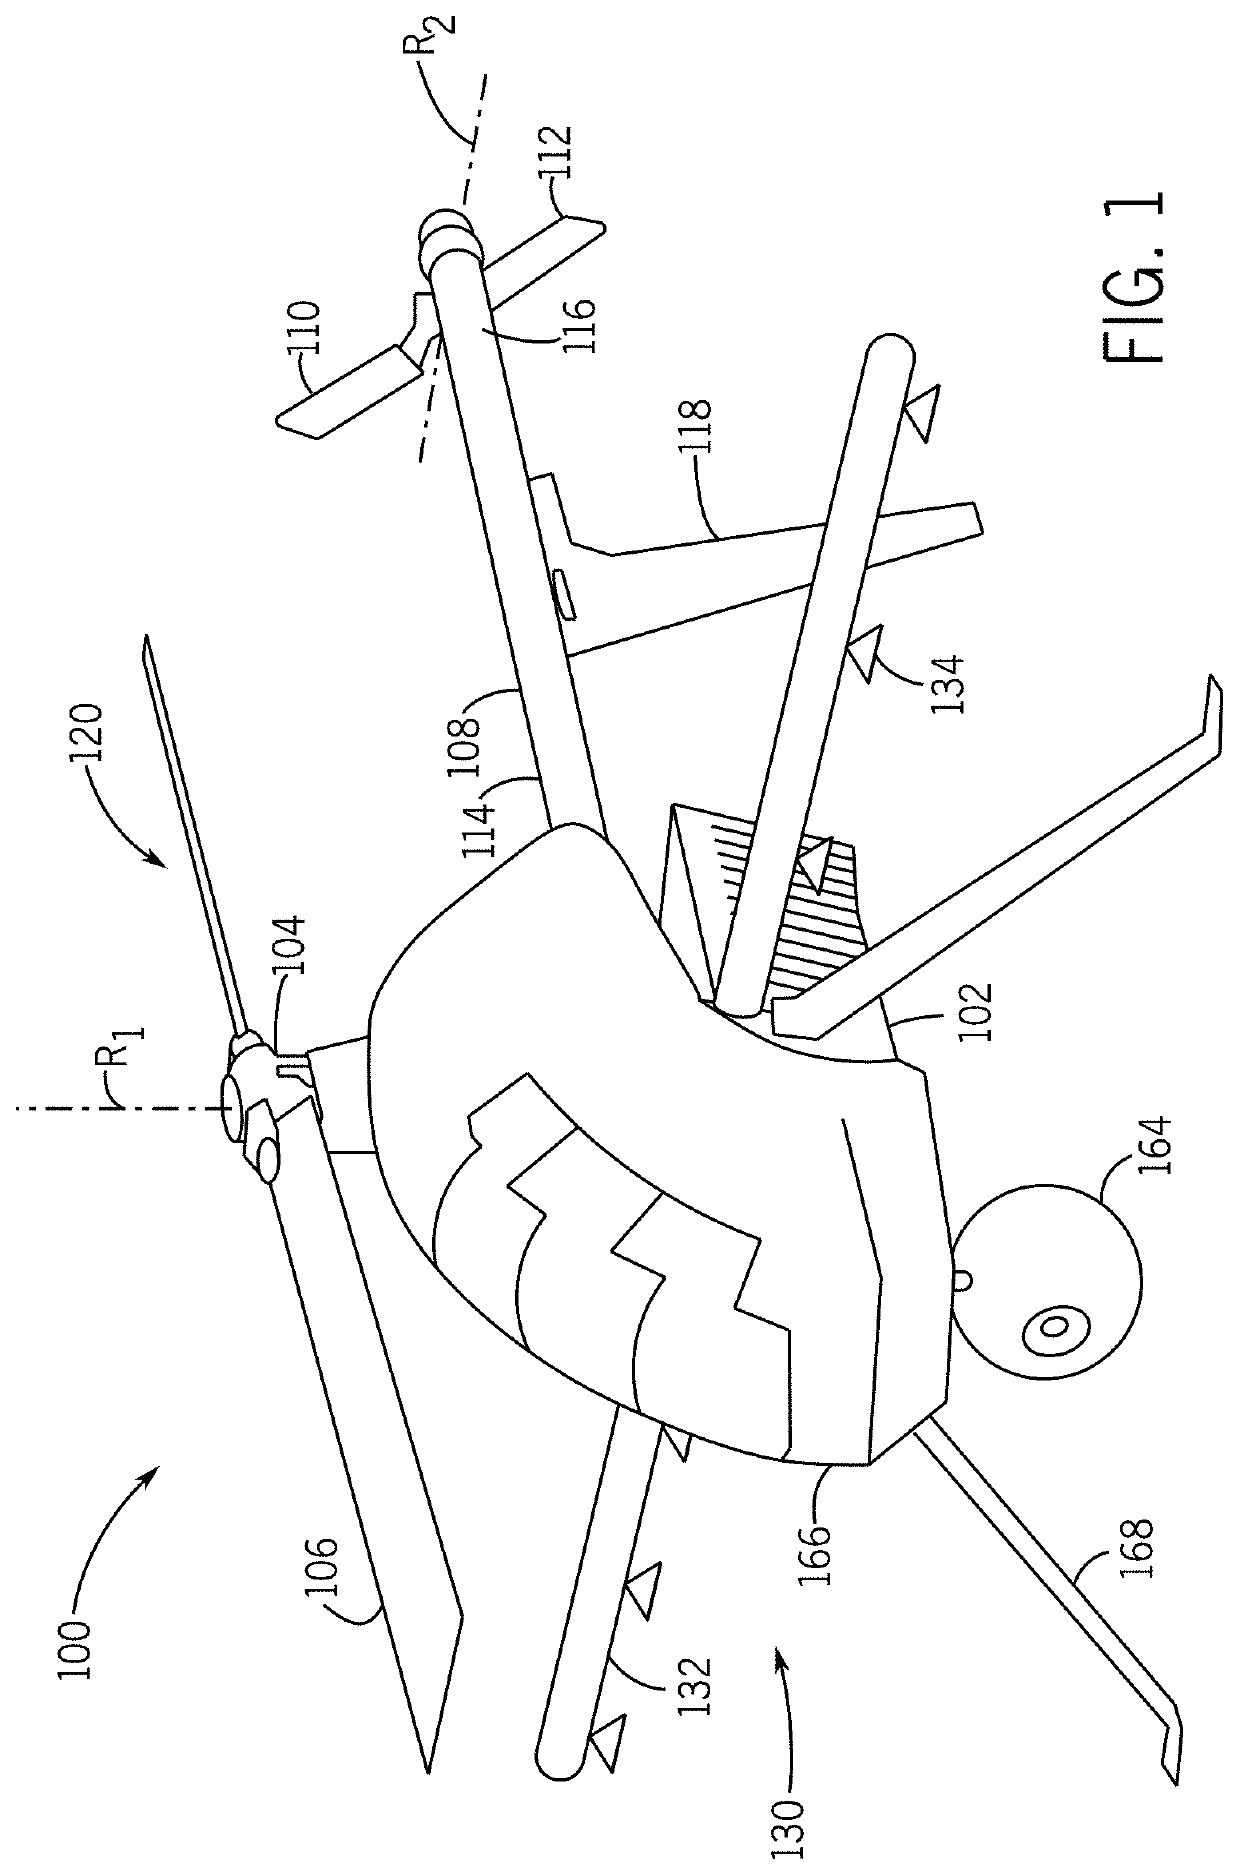 Disbursement system for an unmanned aerial vehicle